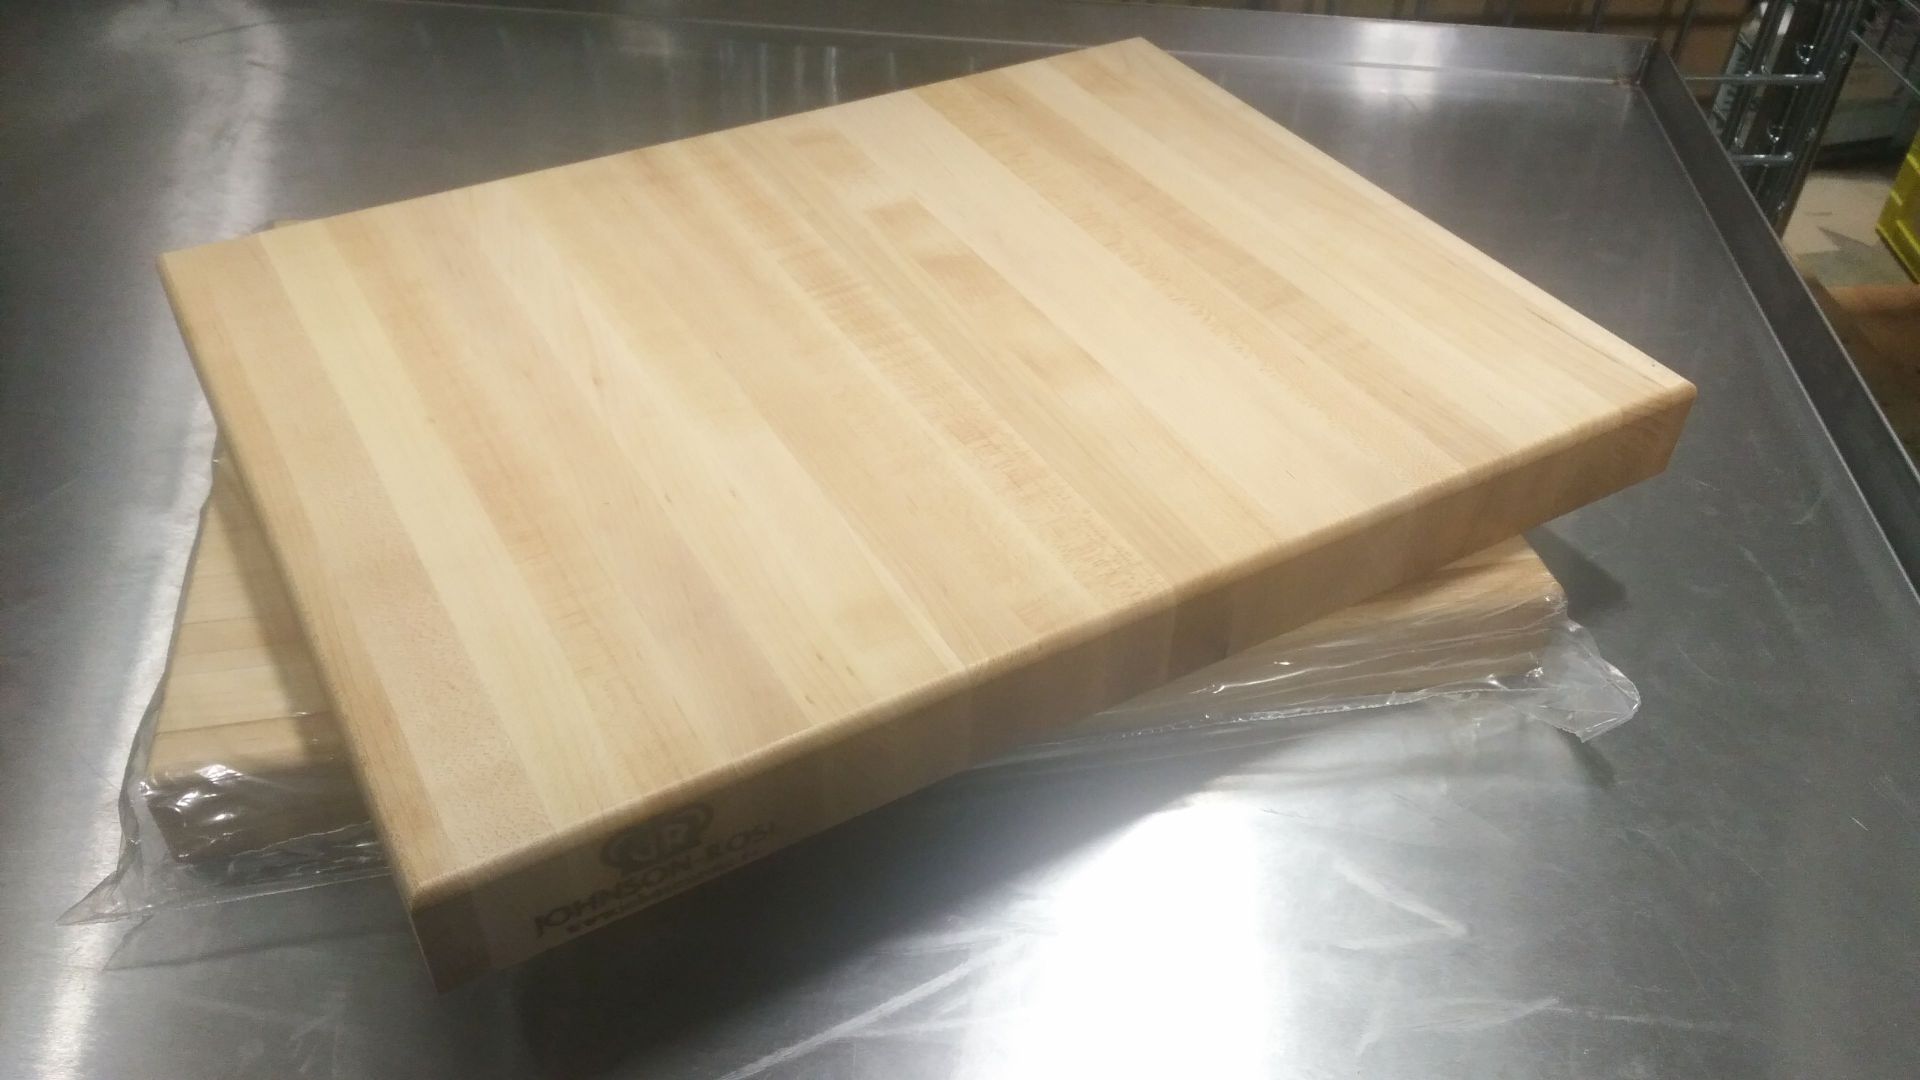 16" x 12" x 1.5" Hard Canadian Maple Solid Carving Board, Johnson Rose 71216 - Image 3 of 3